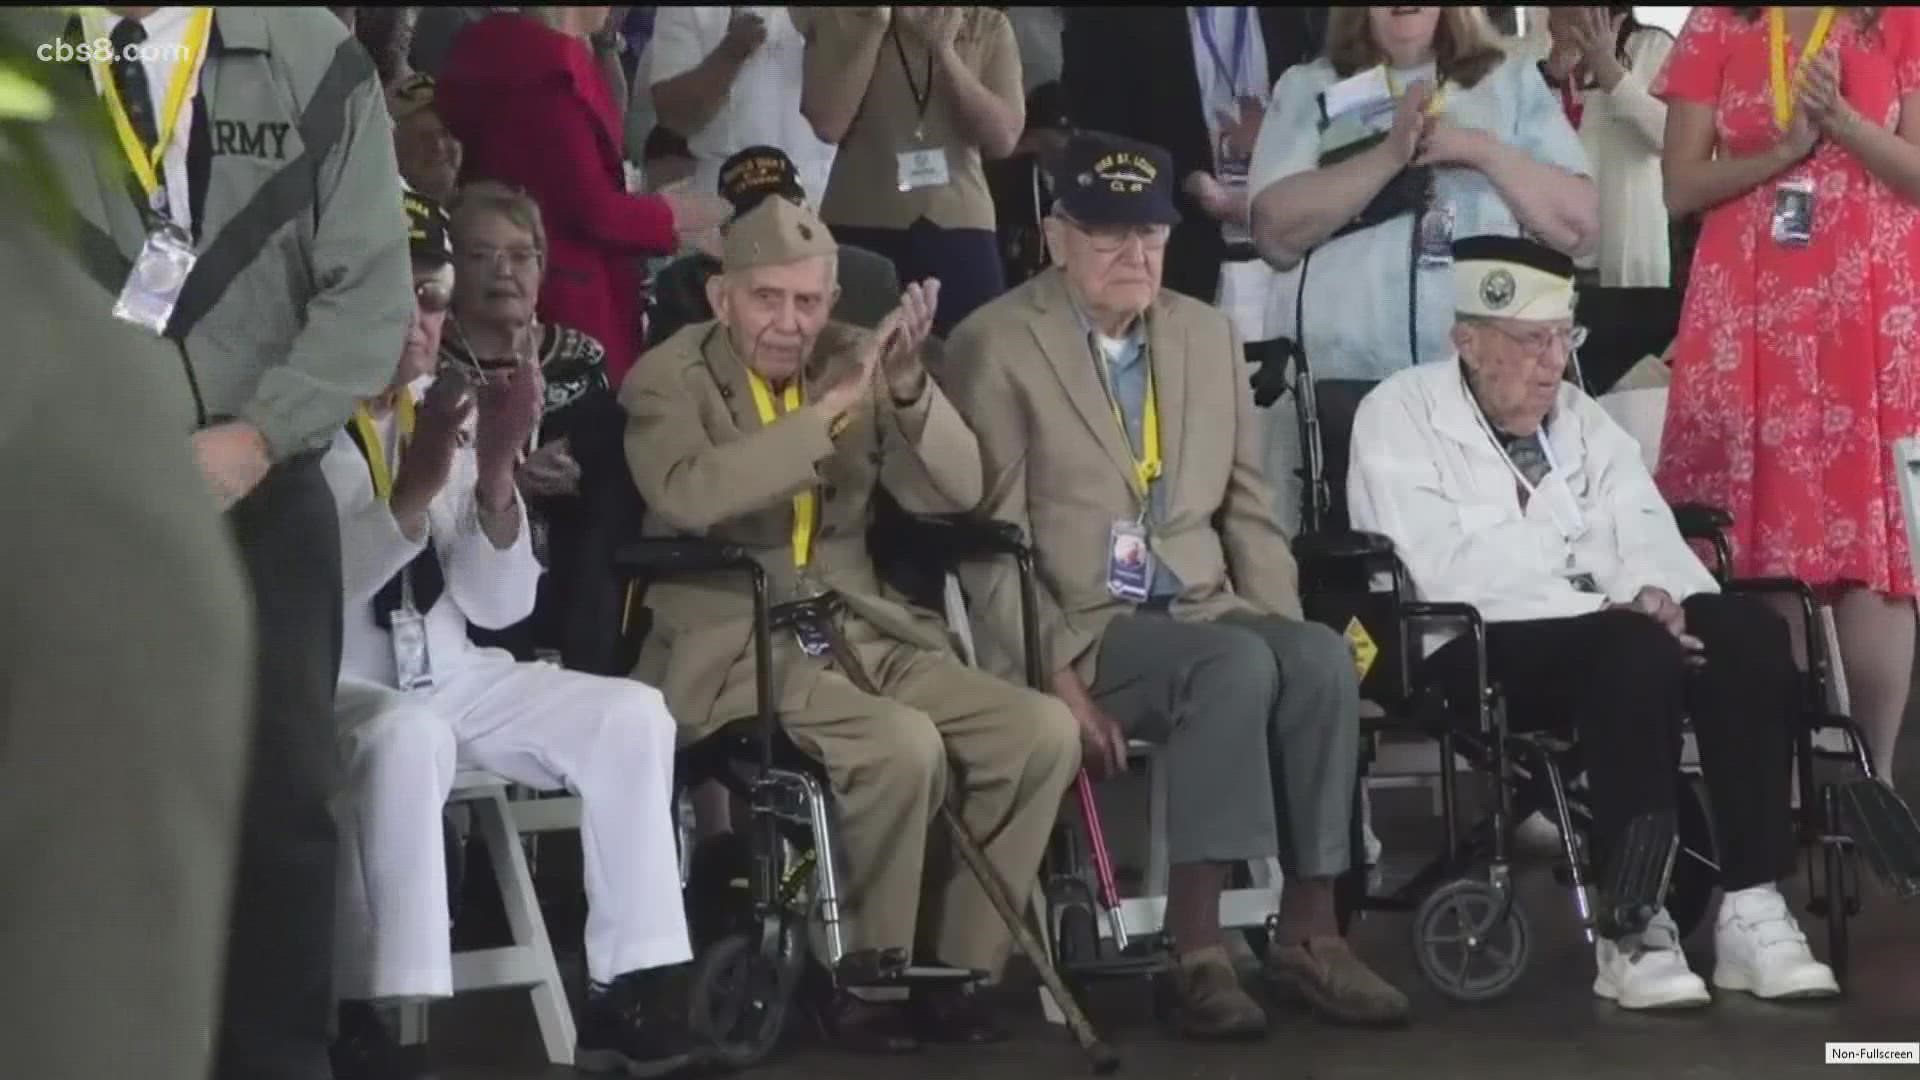 Best Defense Foundation flew 64 WWII veterans including Pearl Harbor survivors to Hawaii for the ceremonies Tuesday.